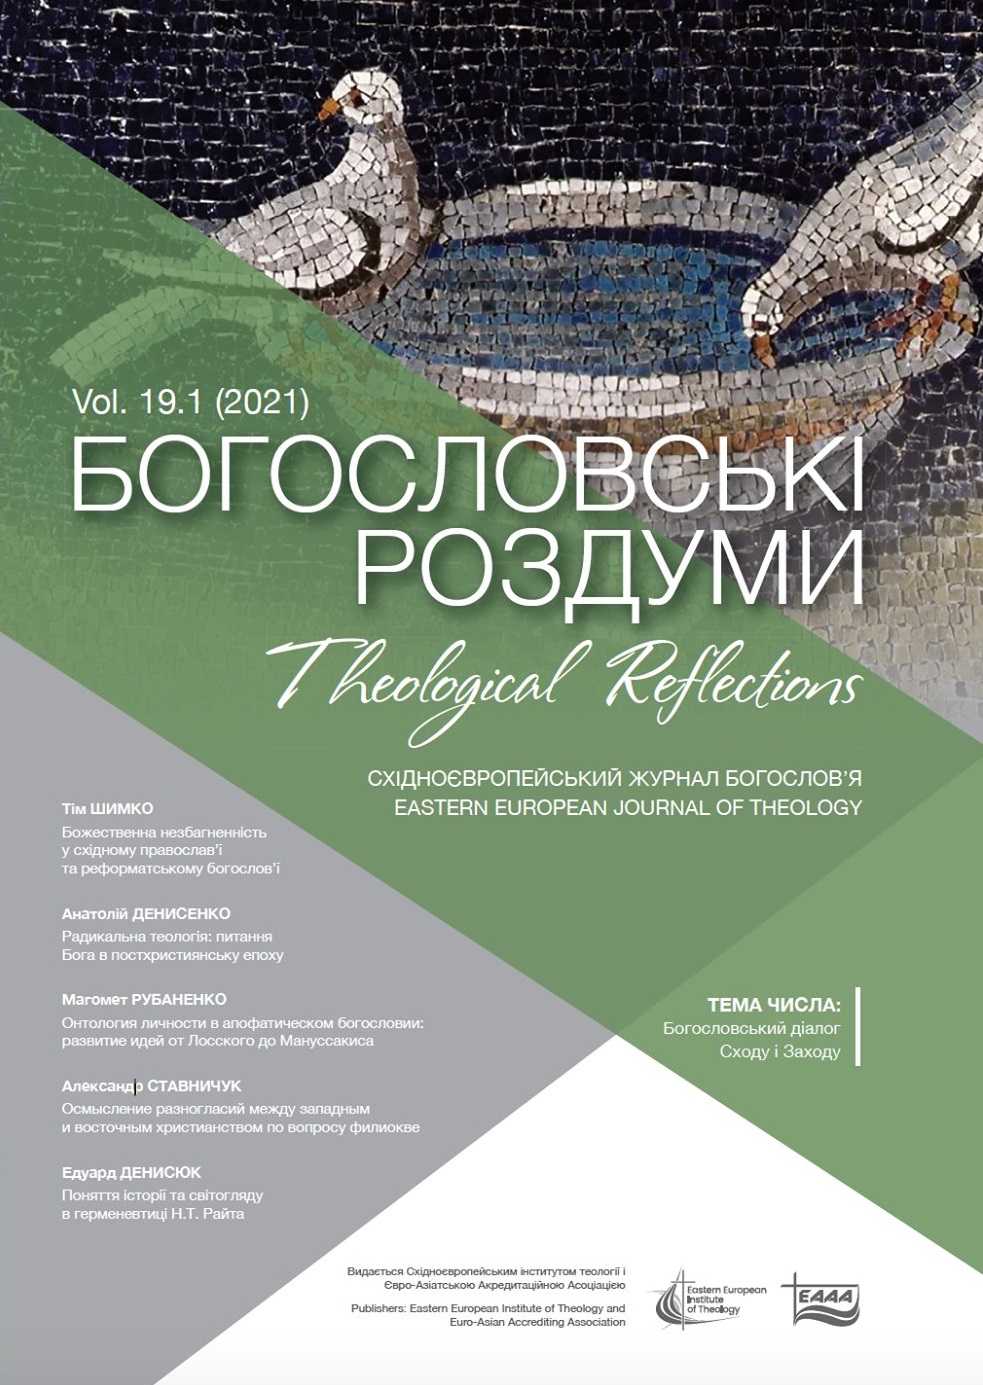 					View Vol. 19 No. 1 (2021): THEOLOGICAL REFLECTIONS: Eastern European Journal of Theology
				